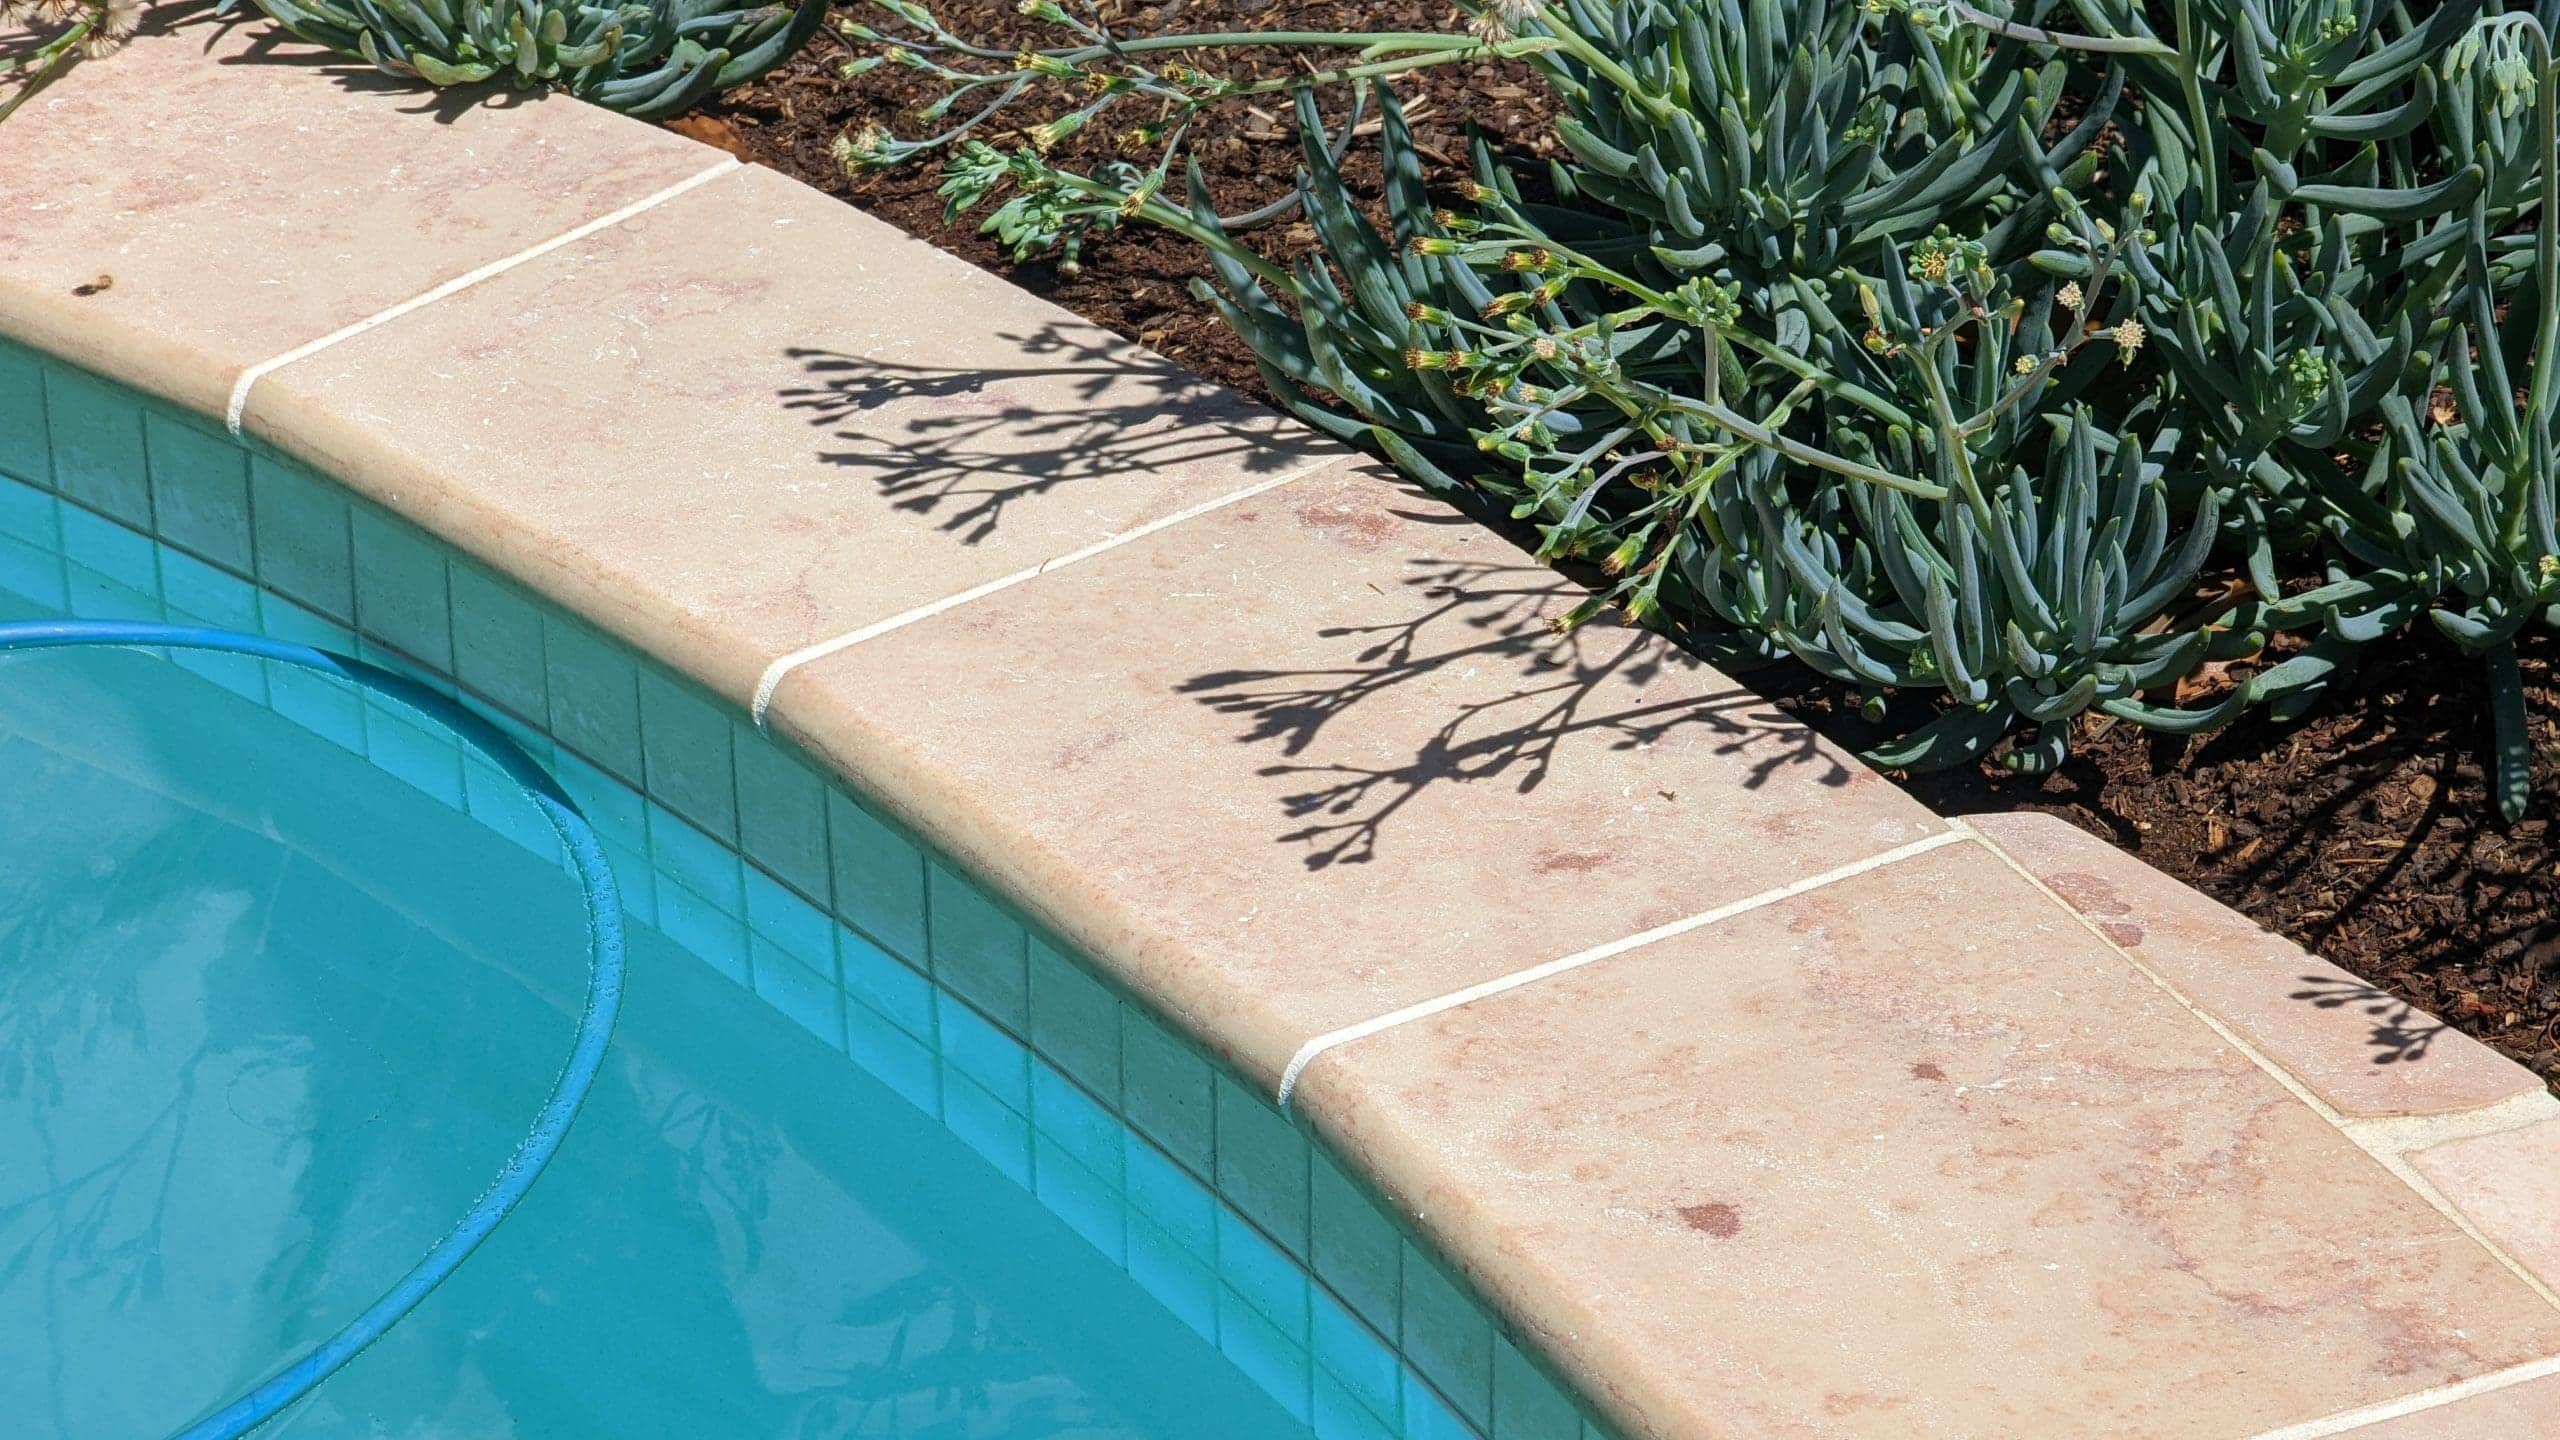 PALM SPRINGS CRAZY PAVING LIMESTONE_RMS TRADERS_NATURAL STONE PAVERS & POOL COPING FACADE INTERNAL PAVERS SUPPLIER MELBOURNE (15)